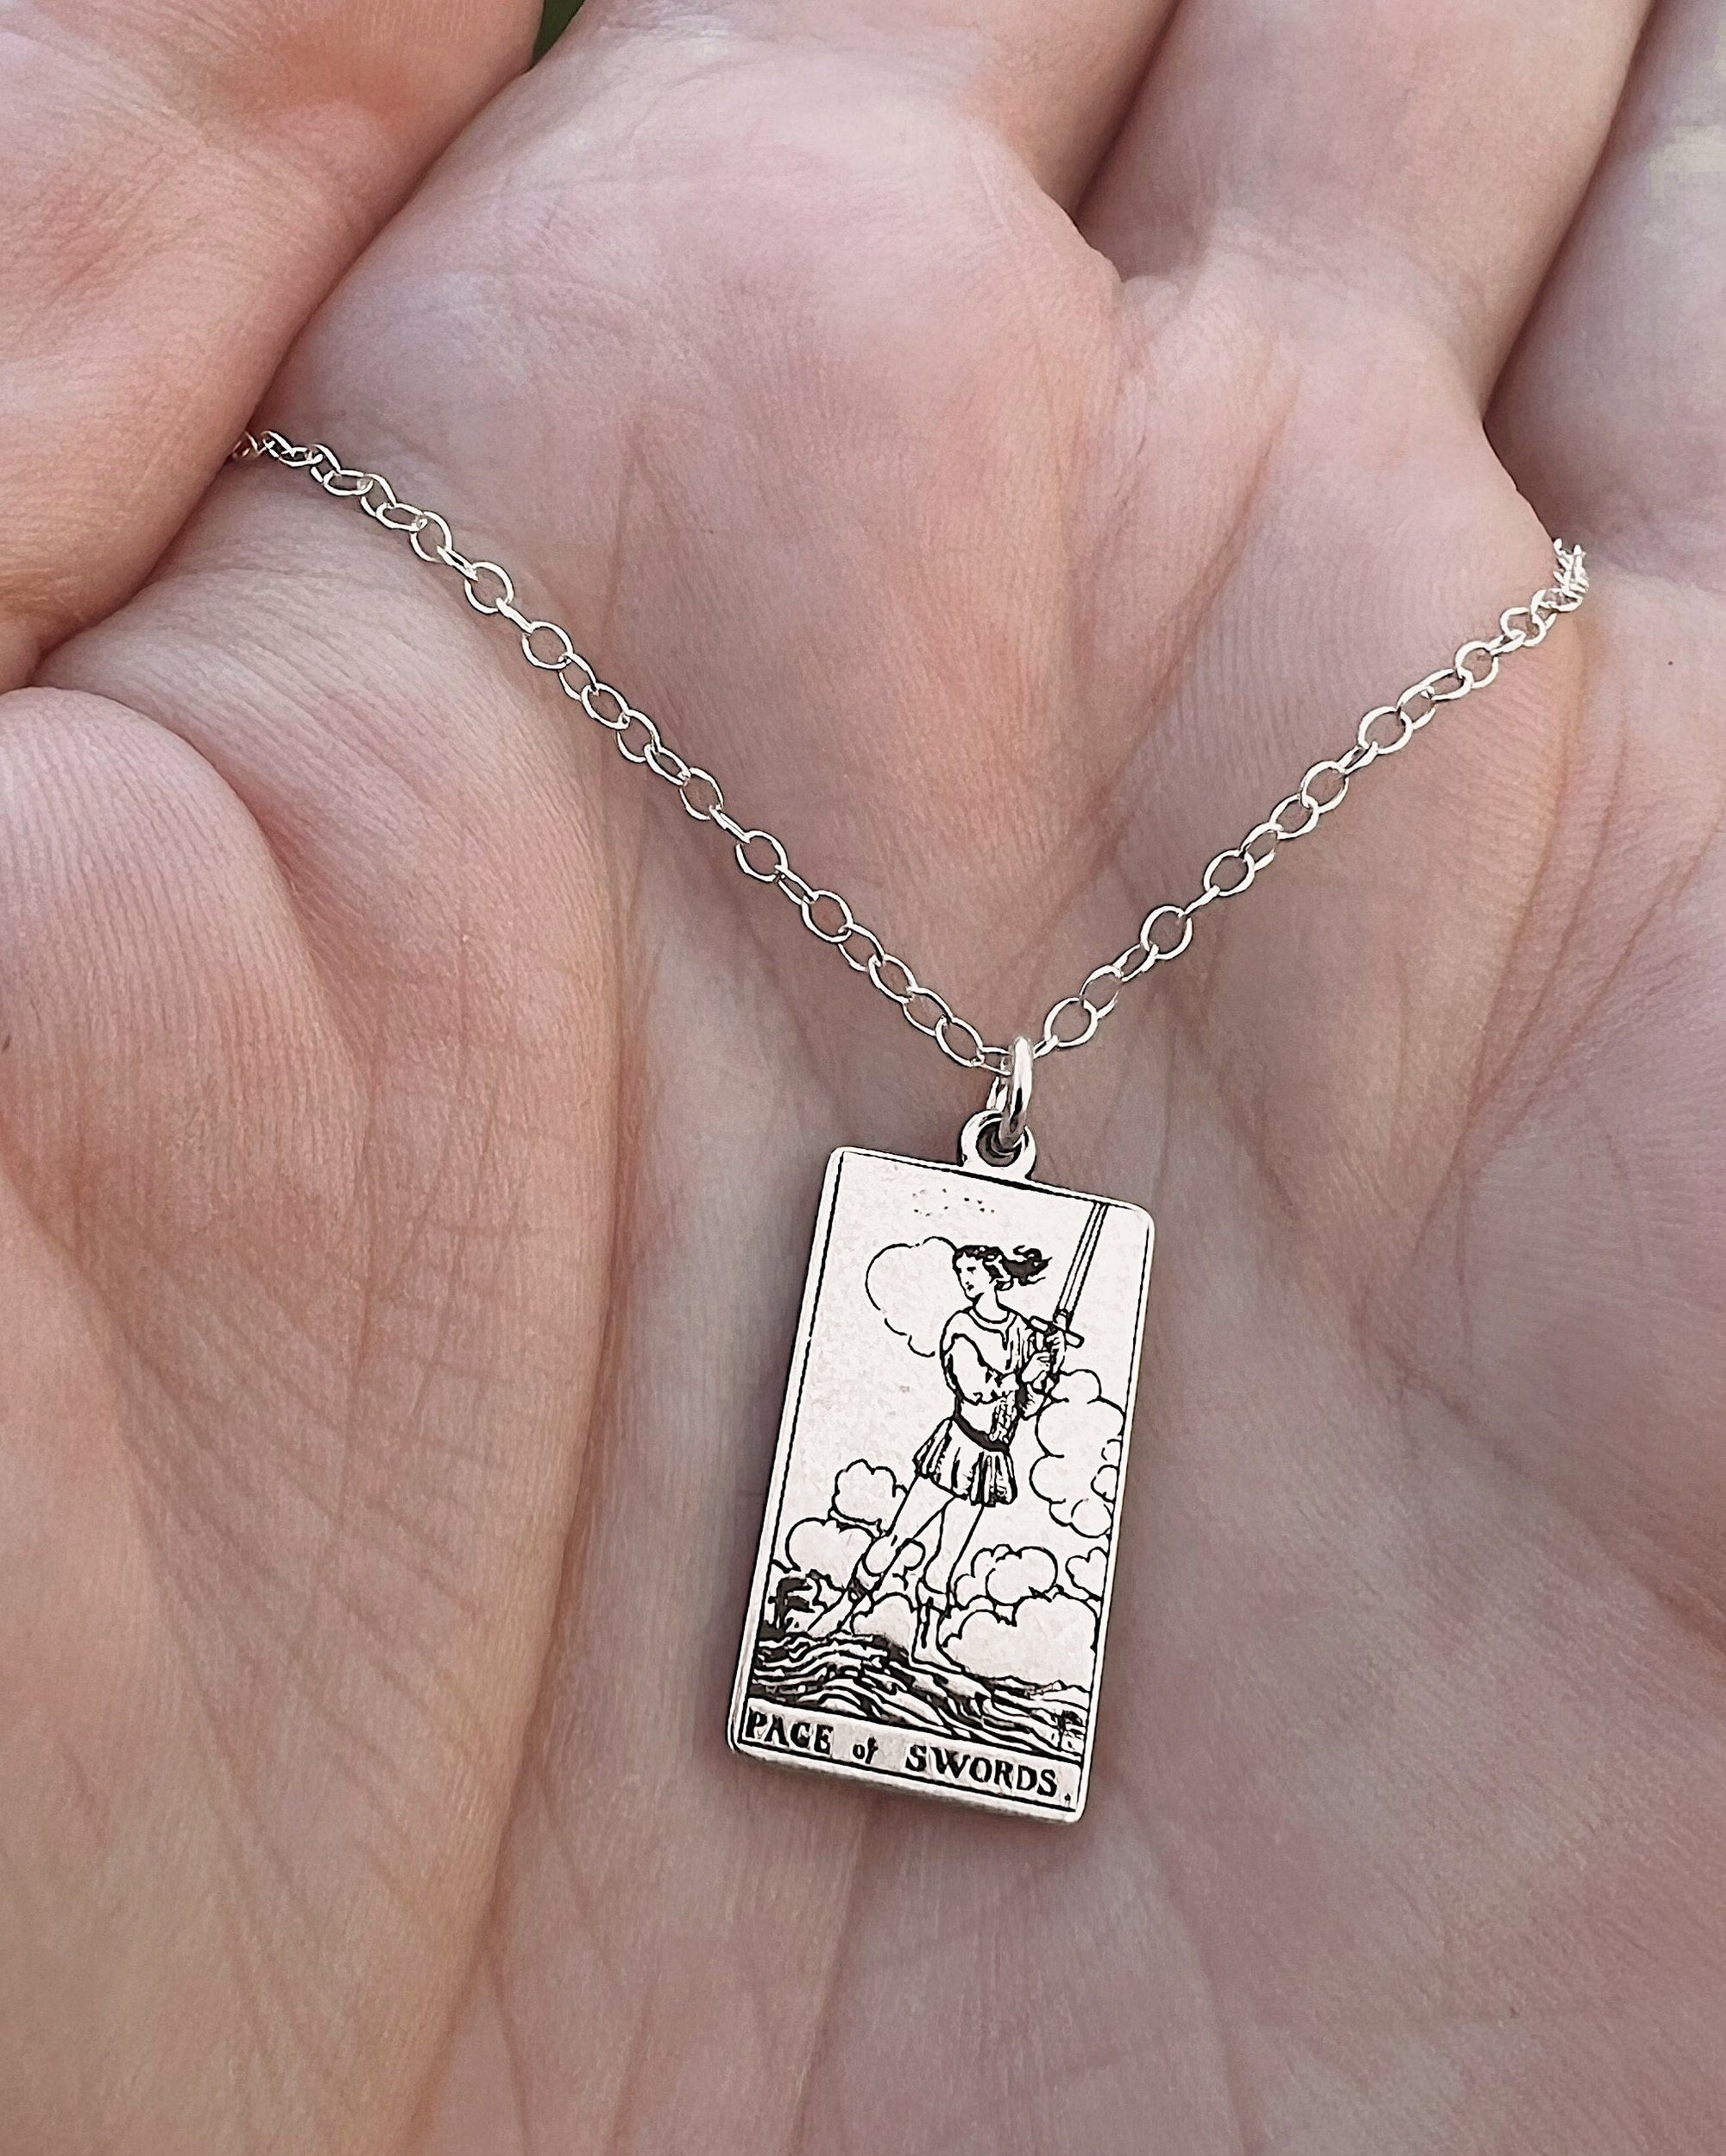 Page of Swords Tarot Card Necklace - Sterling Silver